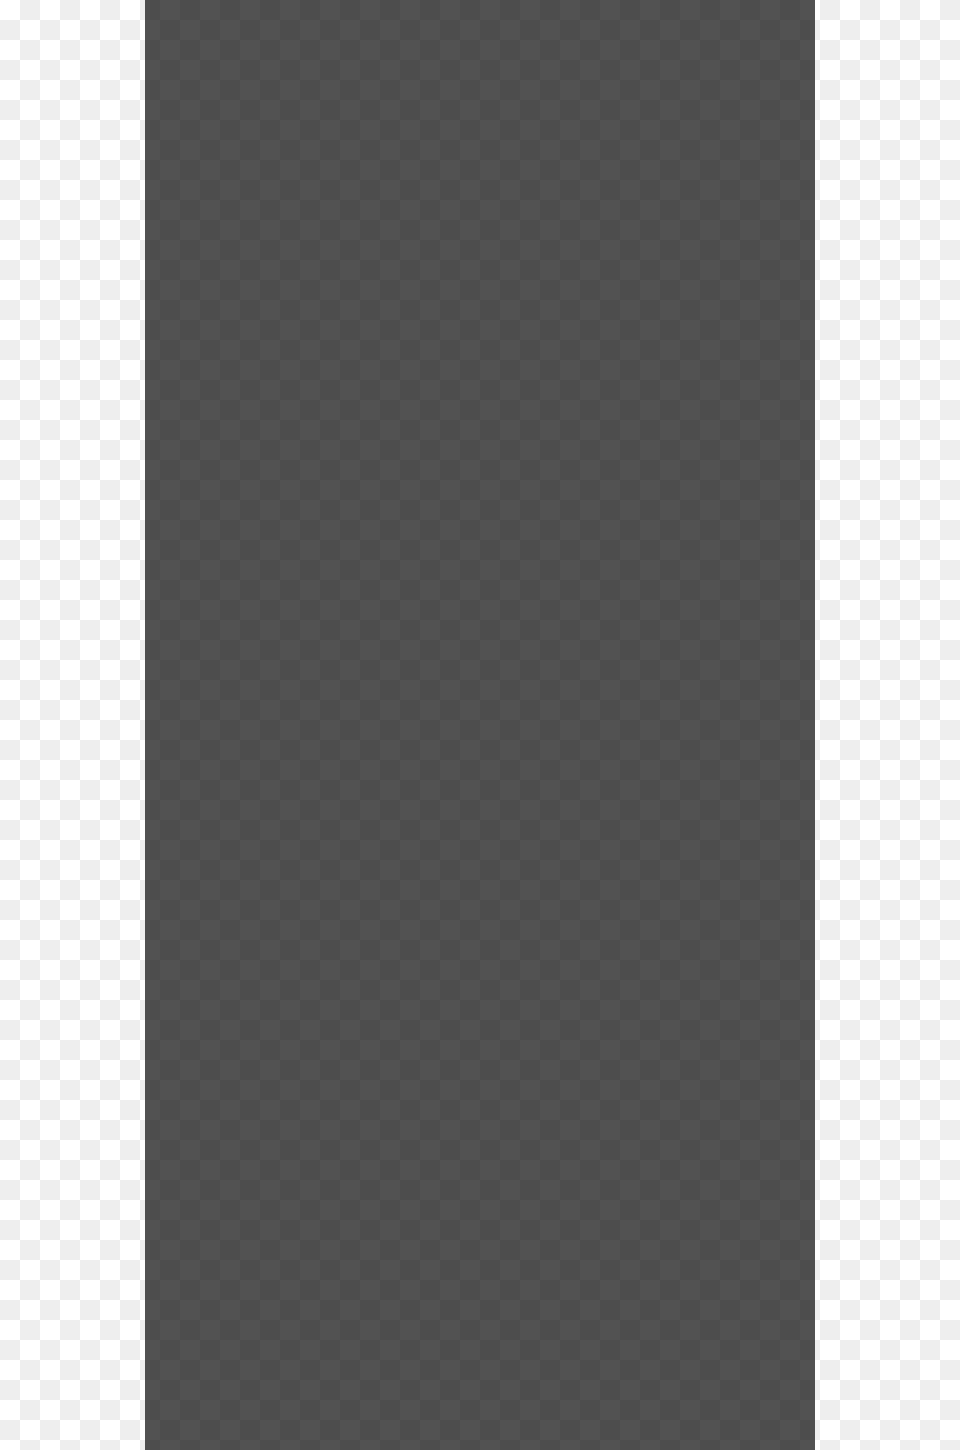 Dark Overlay All Gray Free Transparent Png